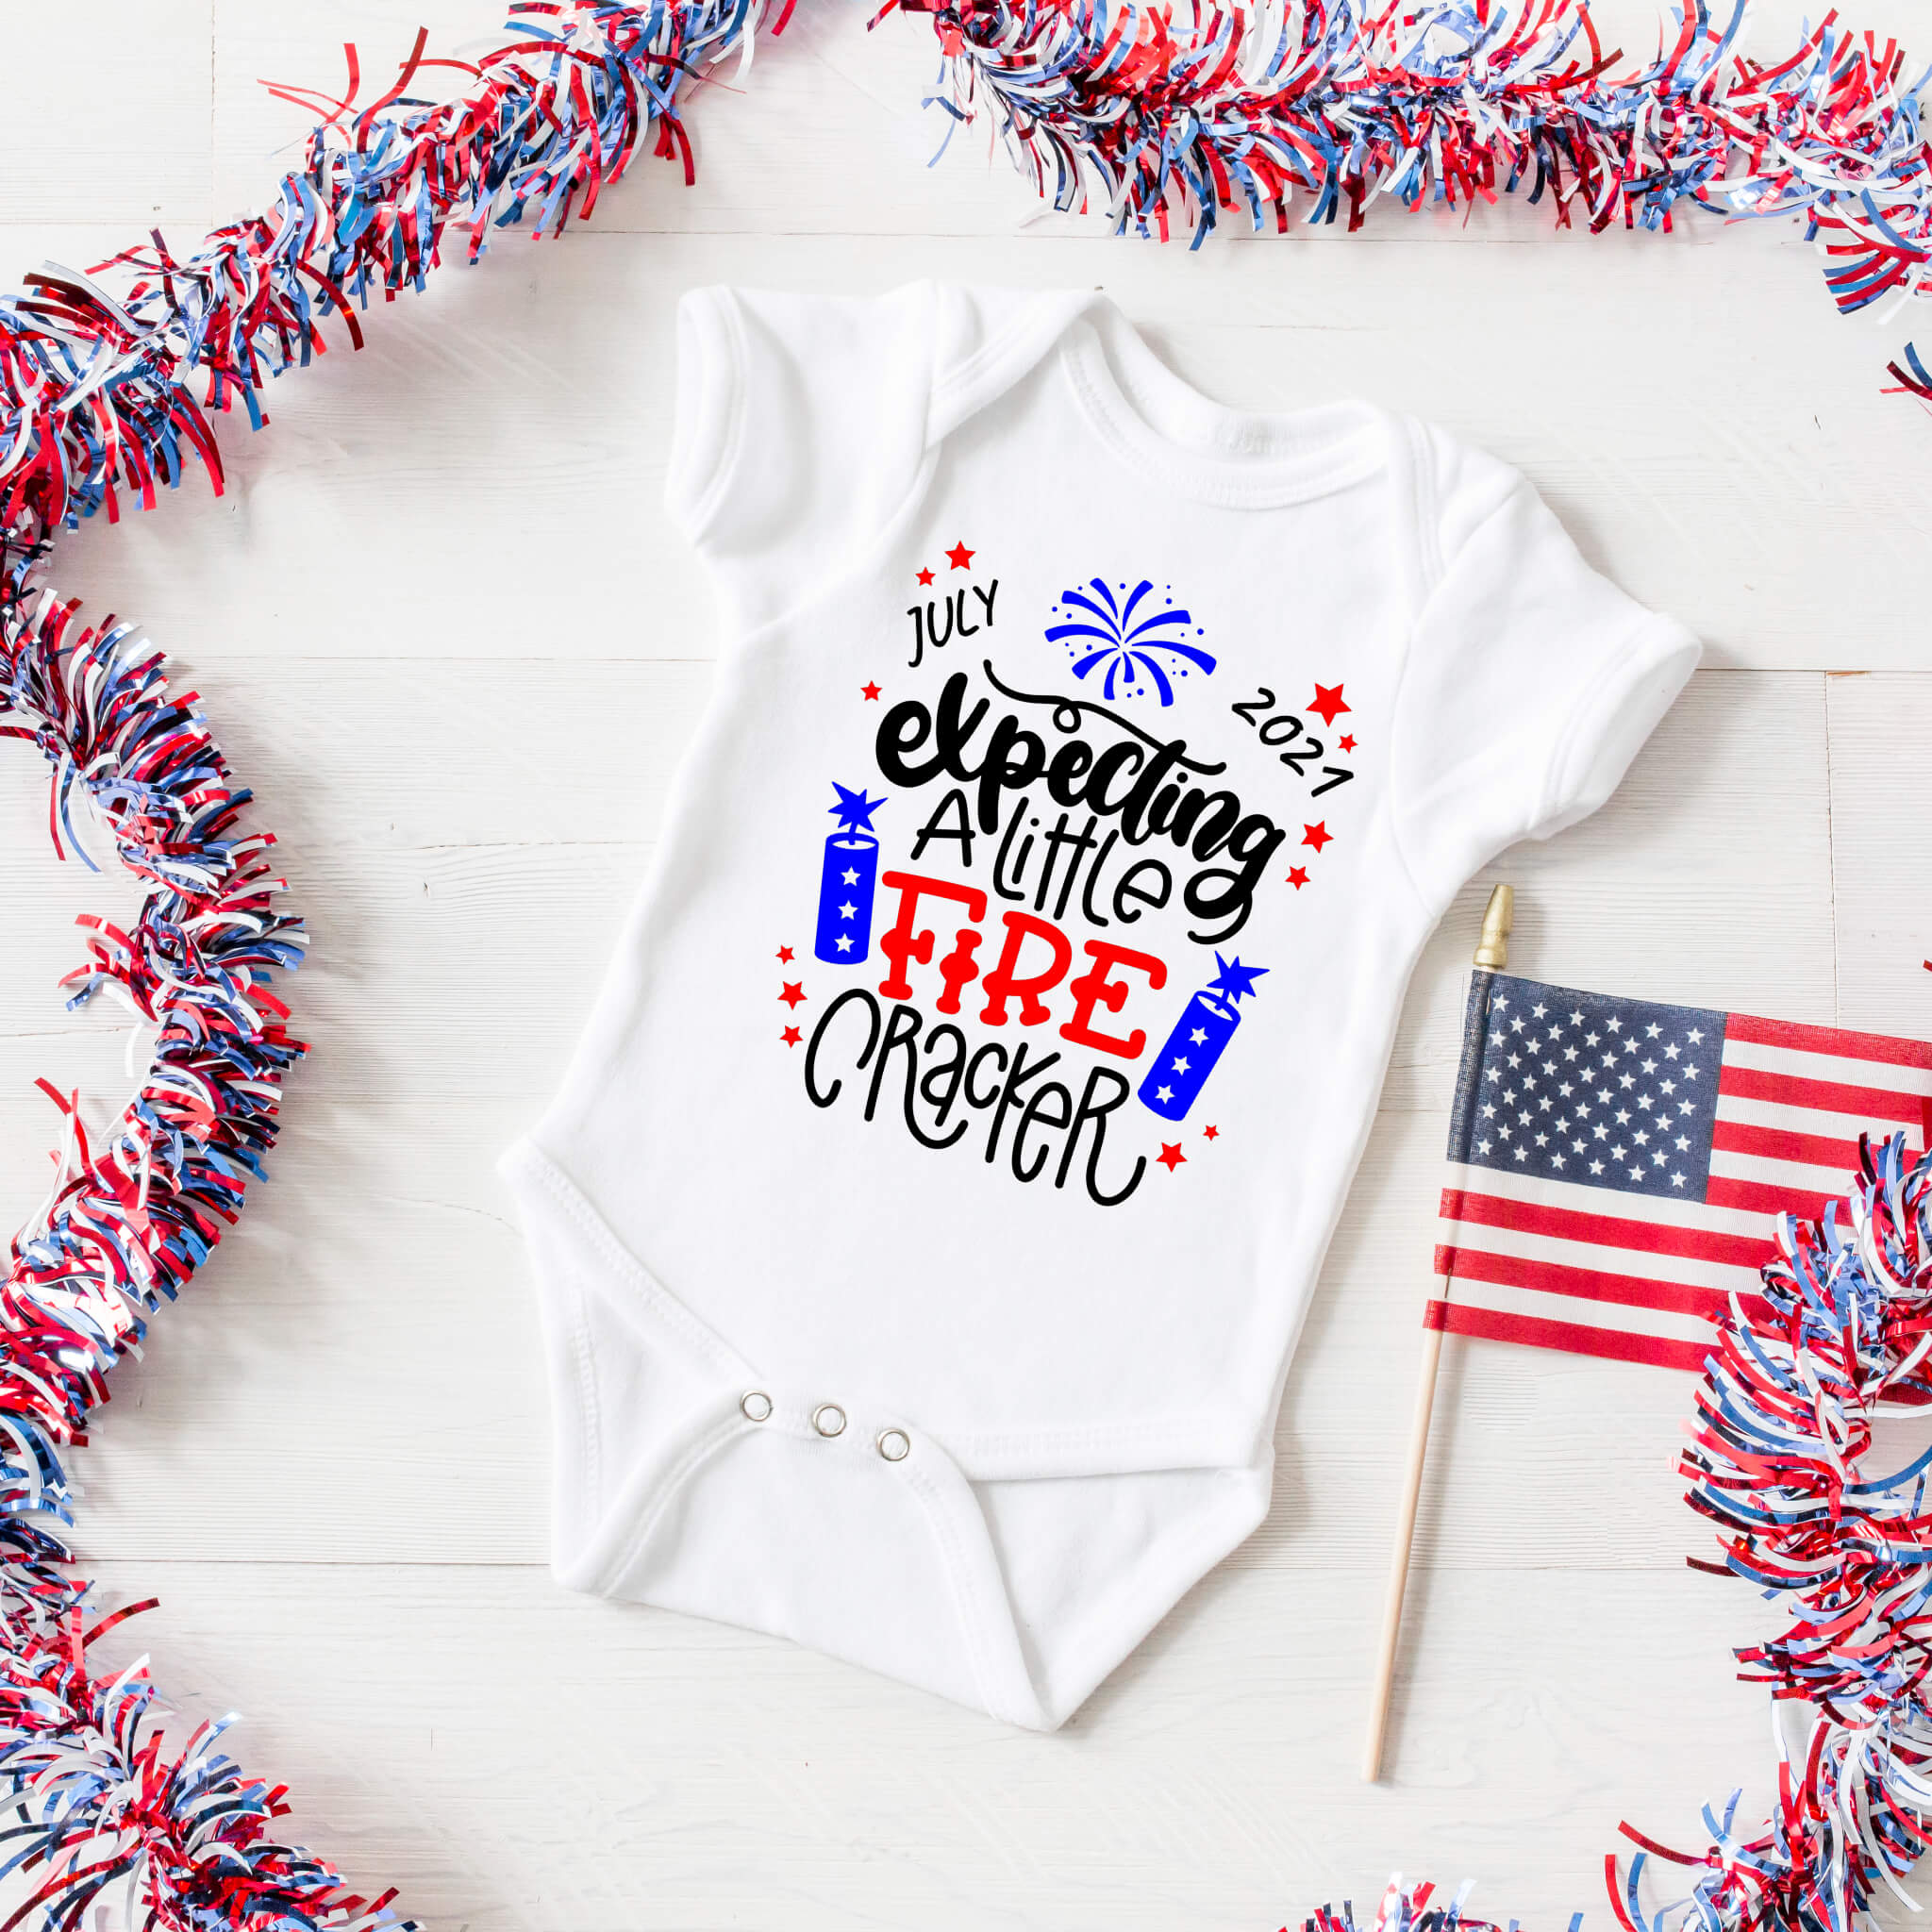 Personalized Pregnancy Announcement, Expecting A Little Firecracker, Dad, Grandma, Grandpa, Auntie, Uncle To Be, Customized Baby Announcement Onesie, July Pregnancy Announcement